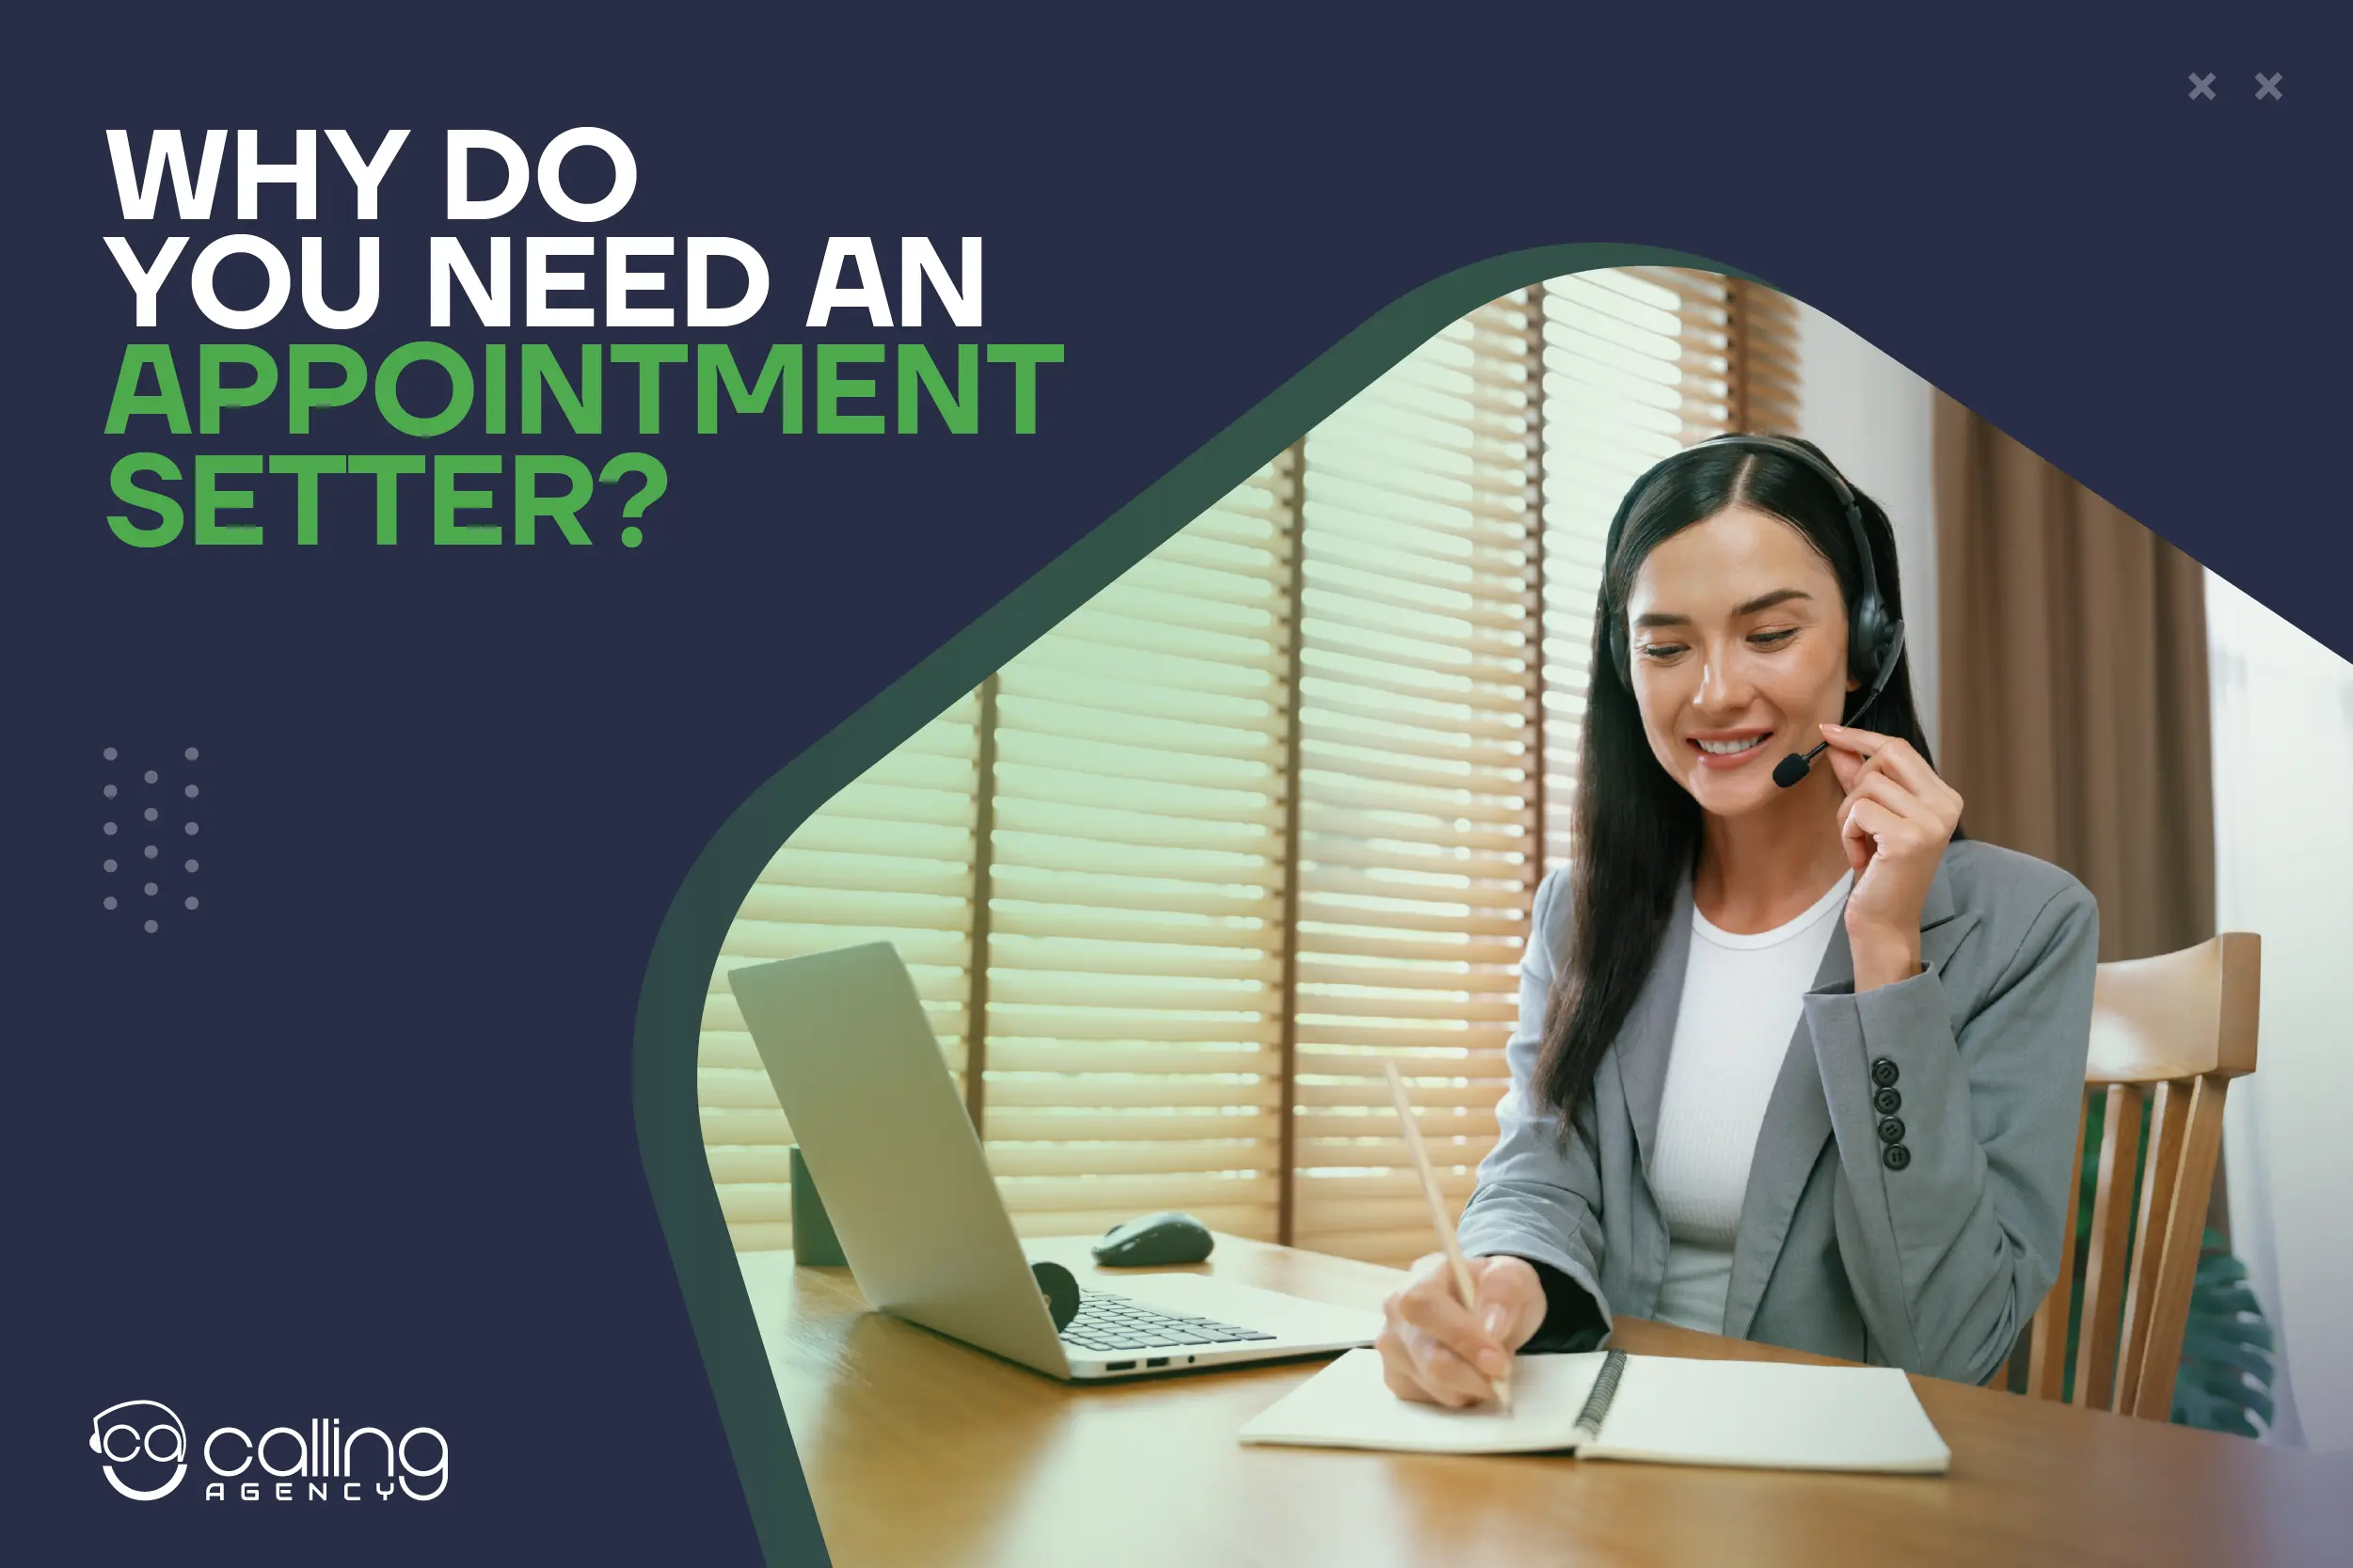 Why Do You Need An Appointment Setter?